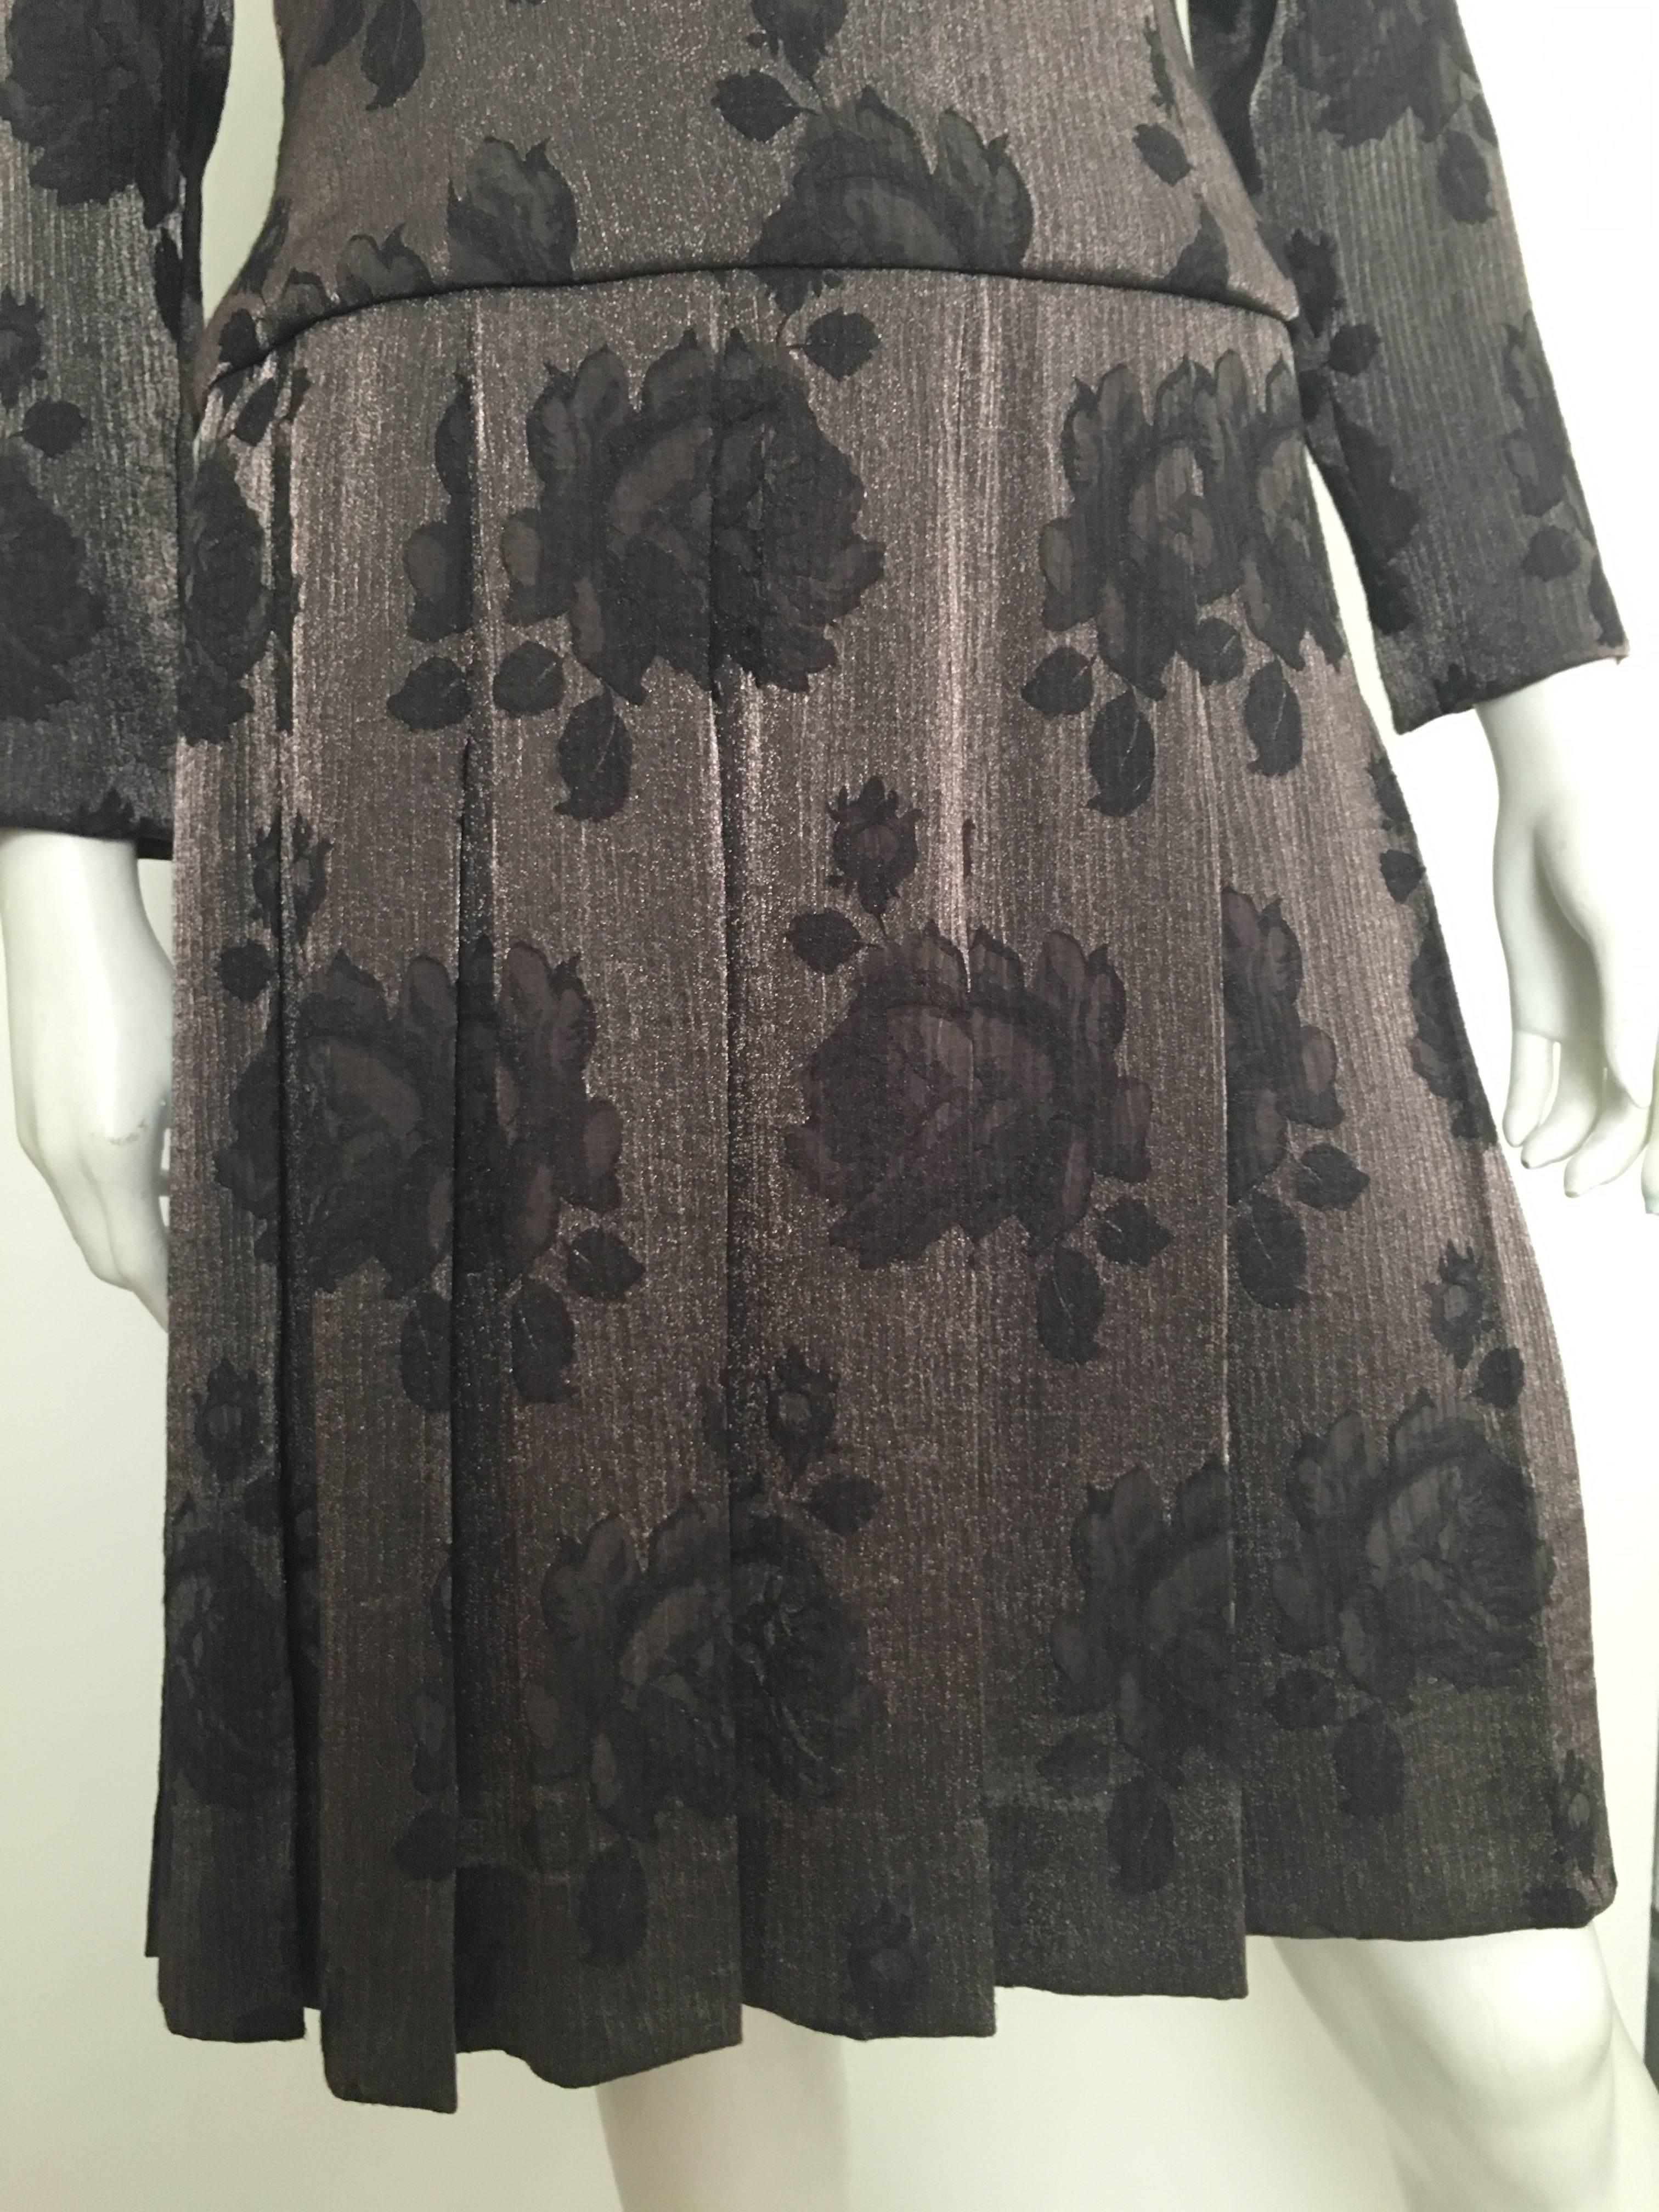 Black Travilla Rose Pattern Pleated Evening Cocktail Dress Size 8. For Sale